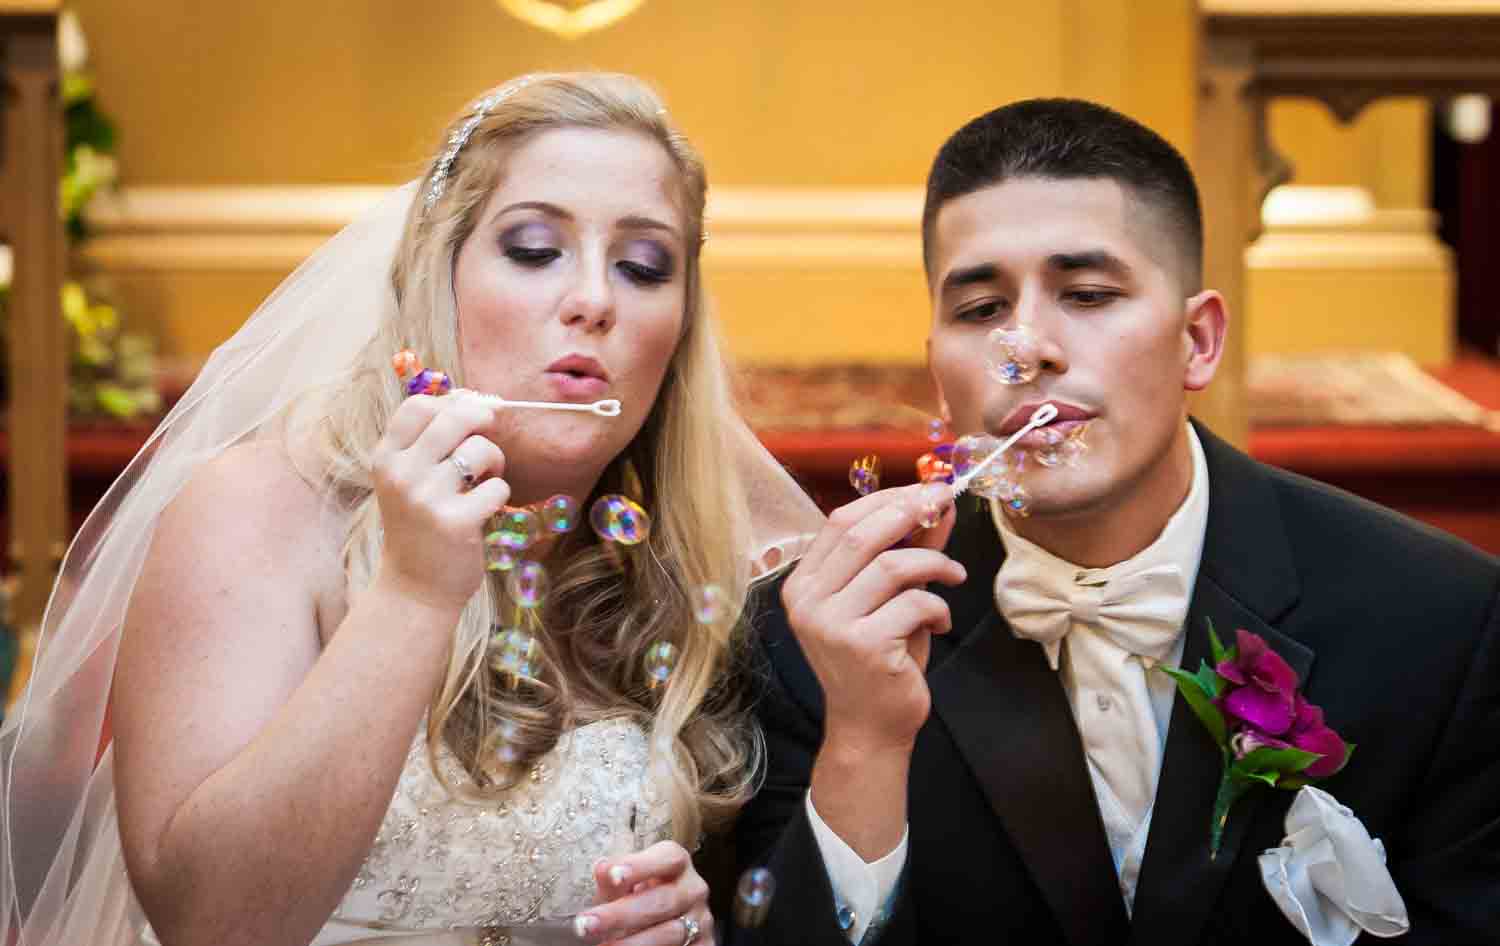 Bride and groom blowing bubbles